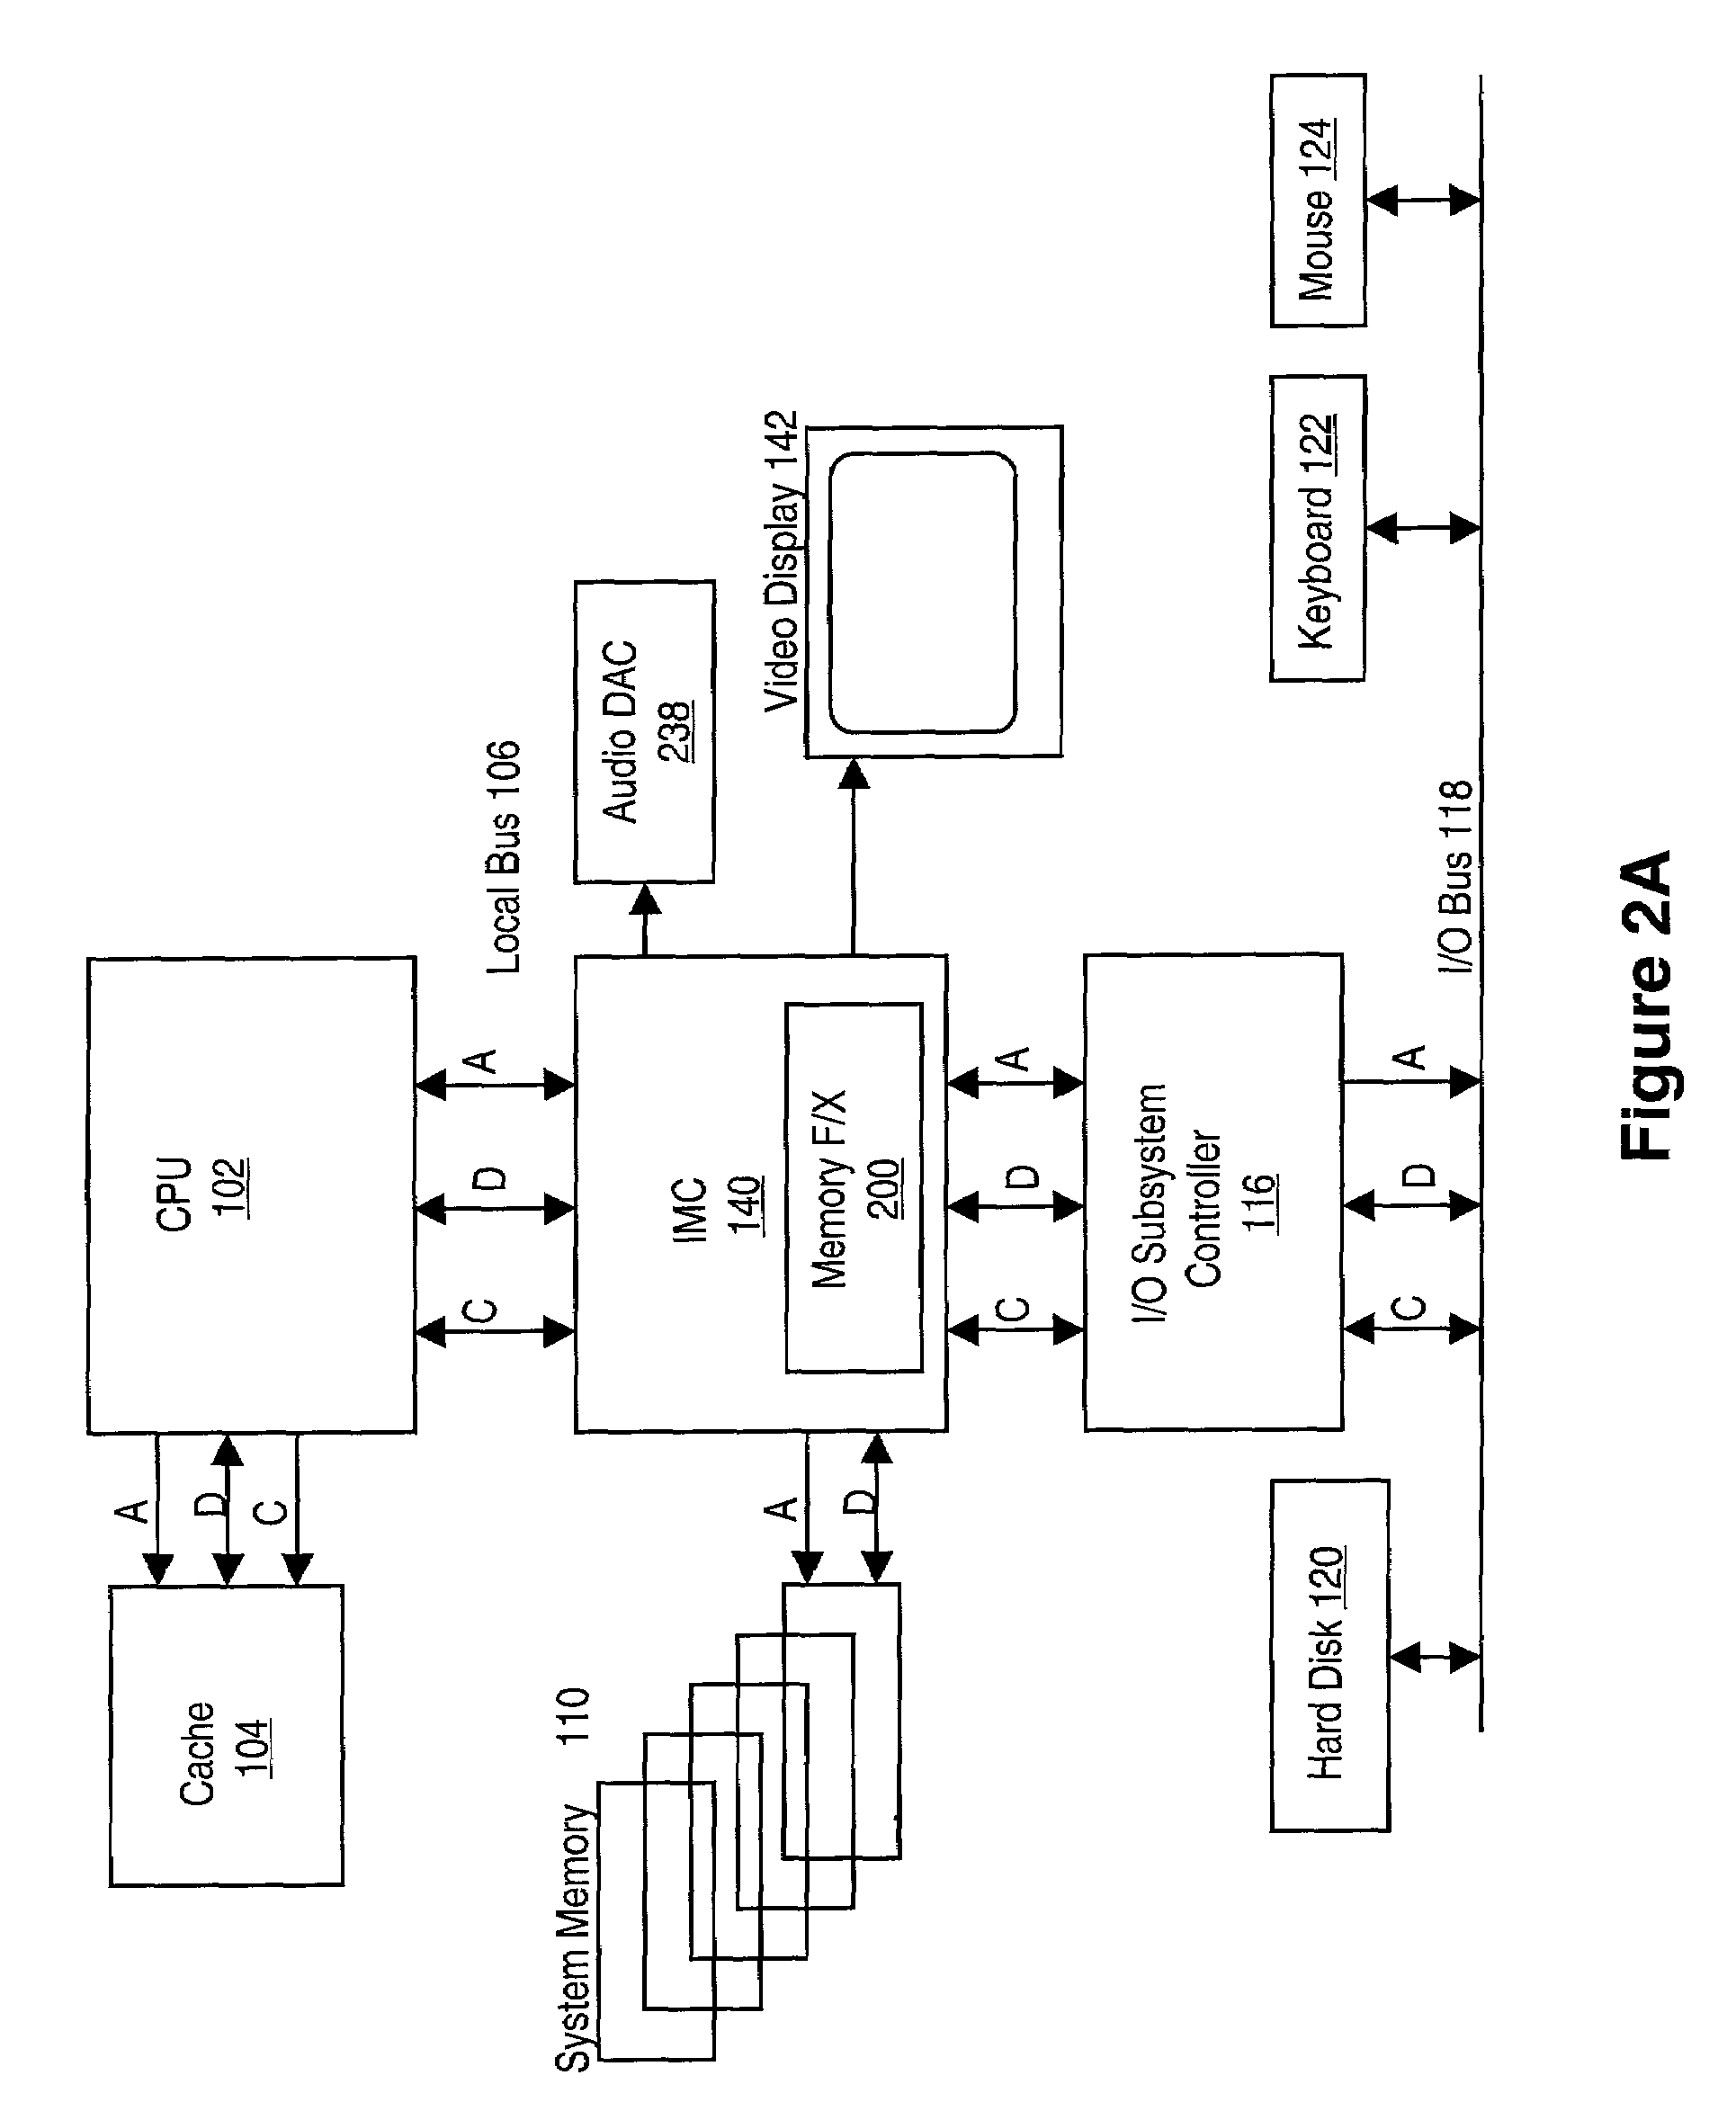 System and method for performing scalable embedded parallel data decompression